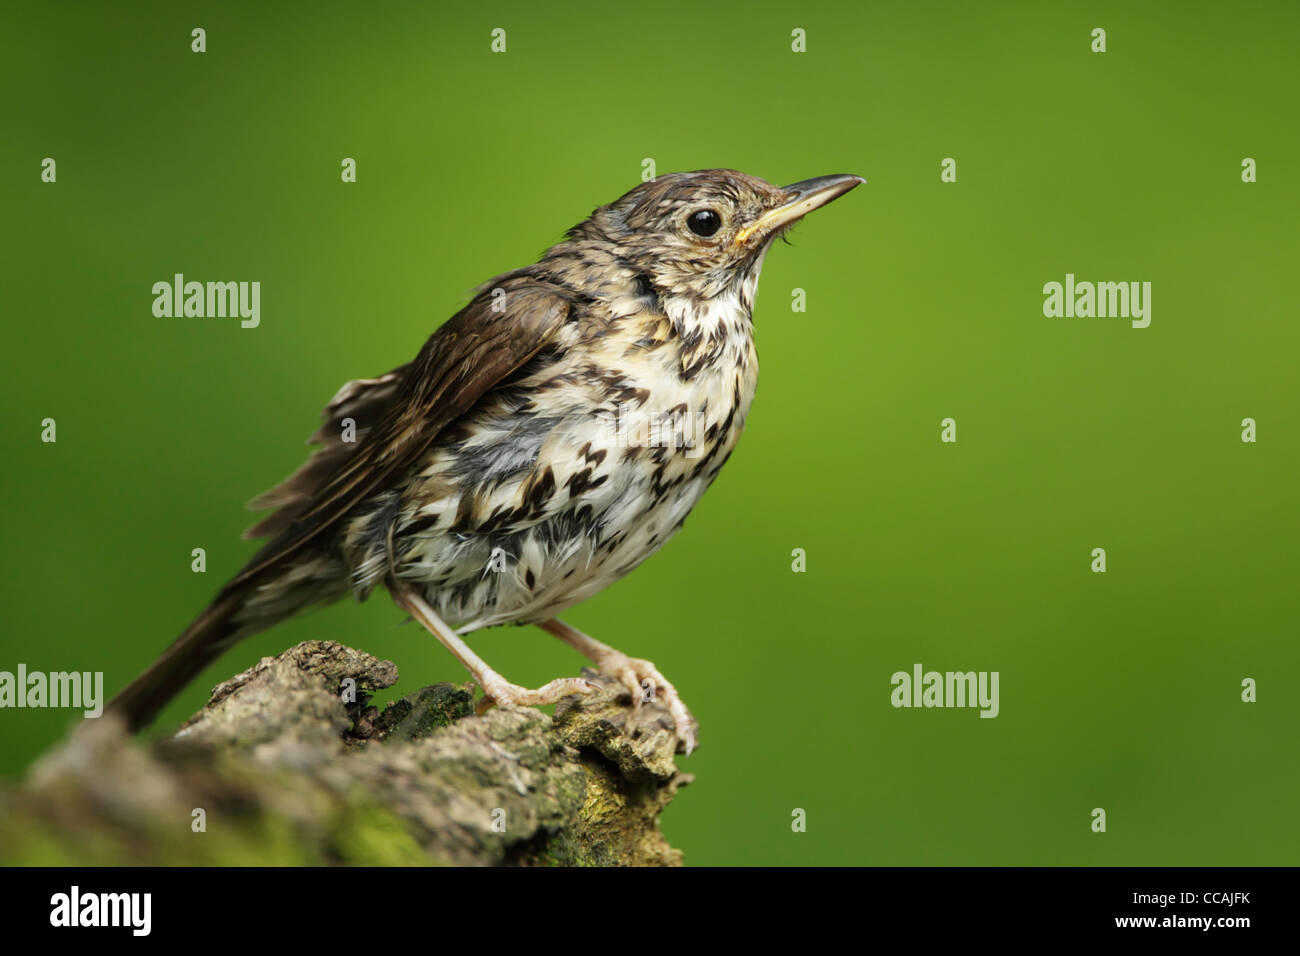 Song thrush (Turdus philomelos) perched on a small upturned log showing wet plumage after bathing Stock Photo